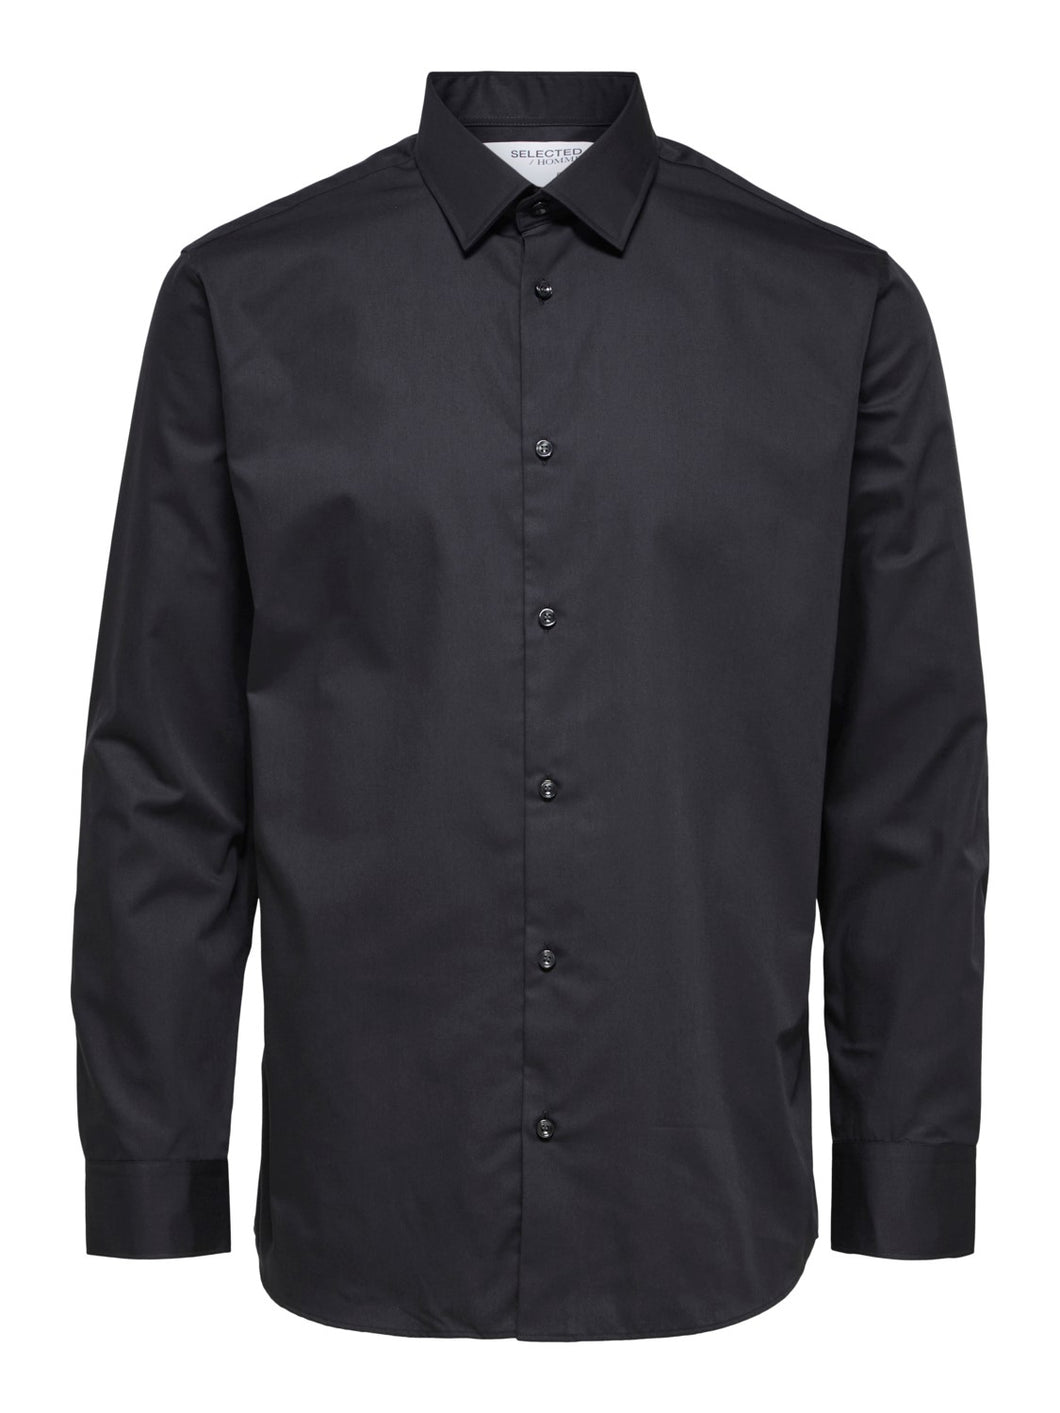 Selected Homme Ethan Shirt Black